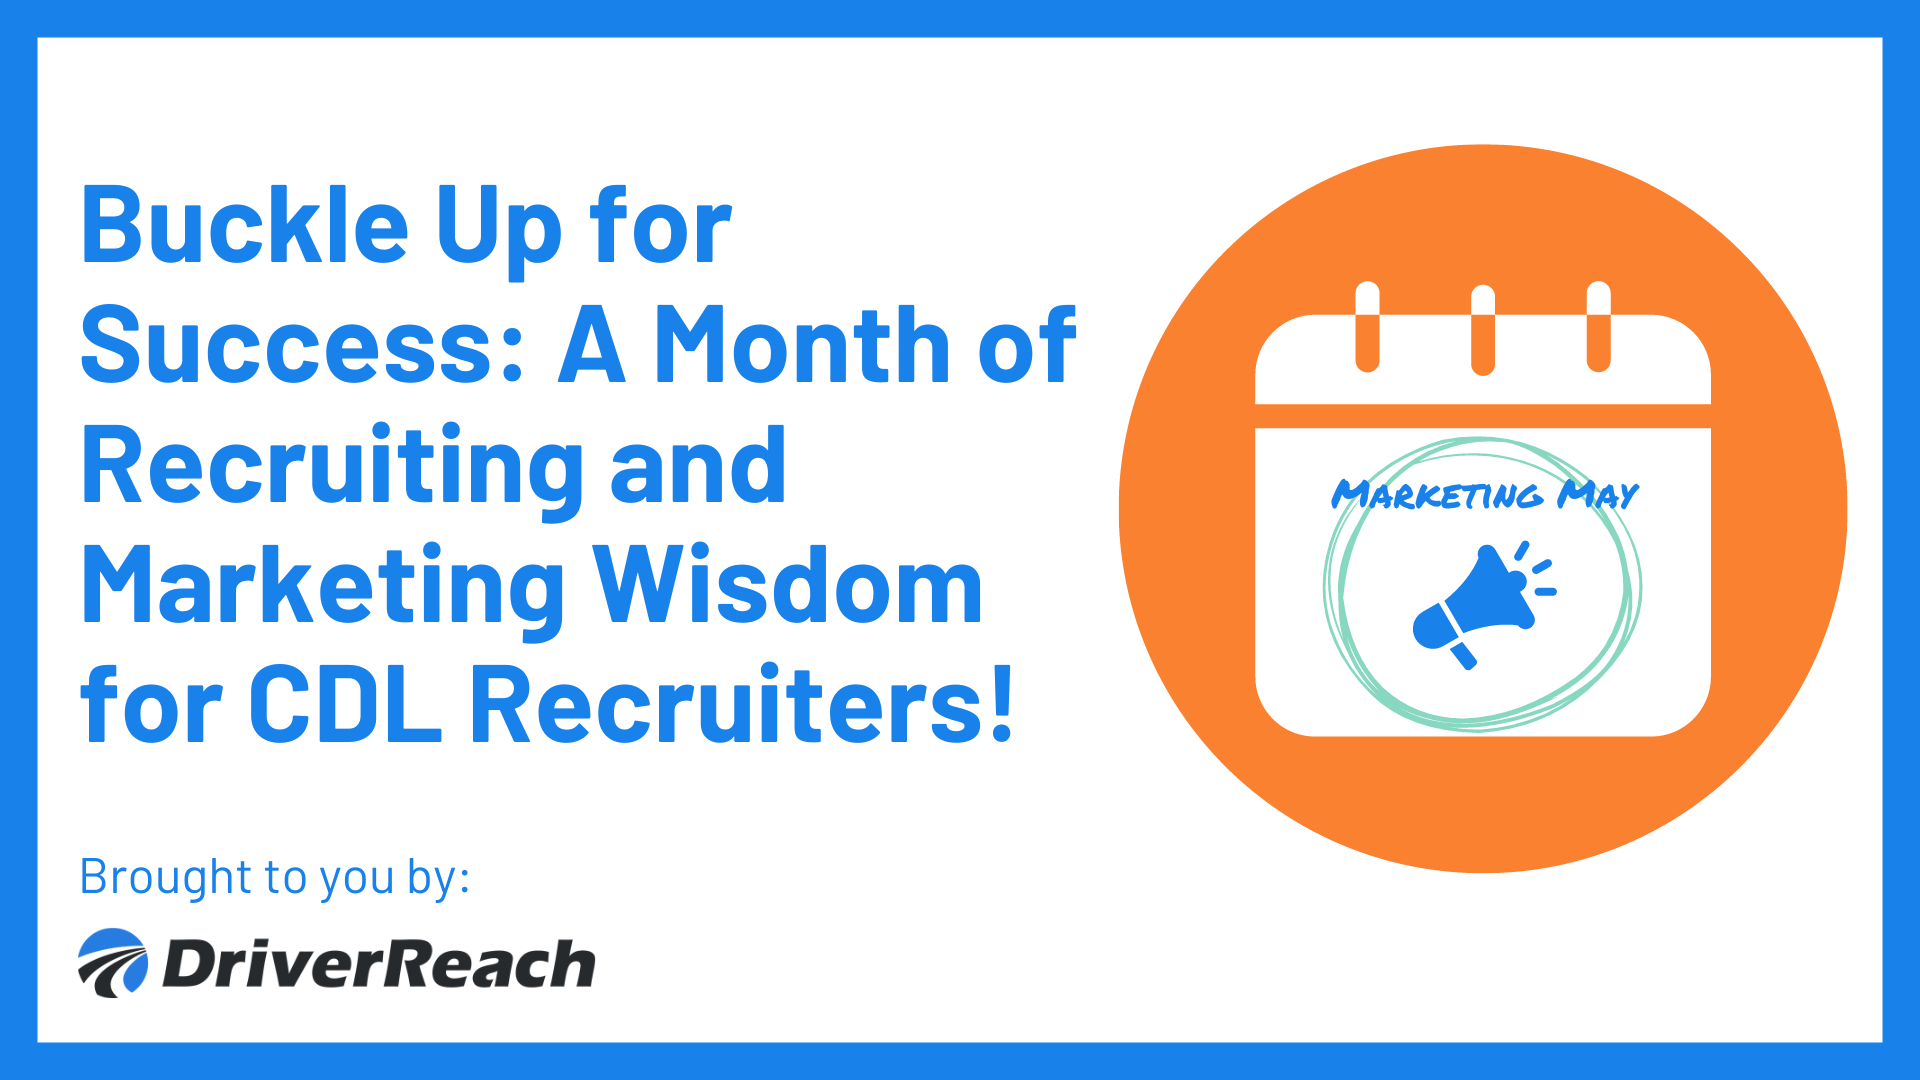 Buckle Up for Success: A Month of Recruiting and Marketing Wisdom for CDL Recruiters! 